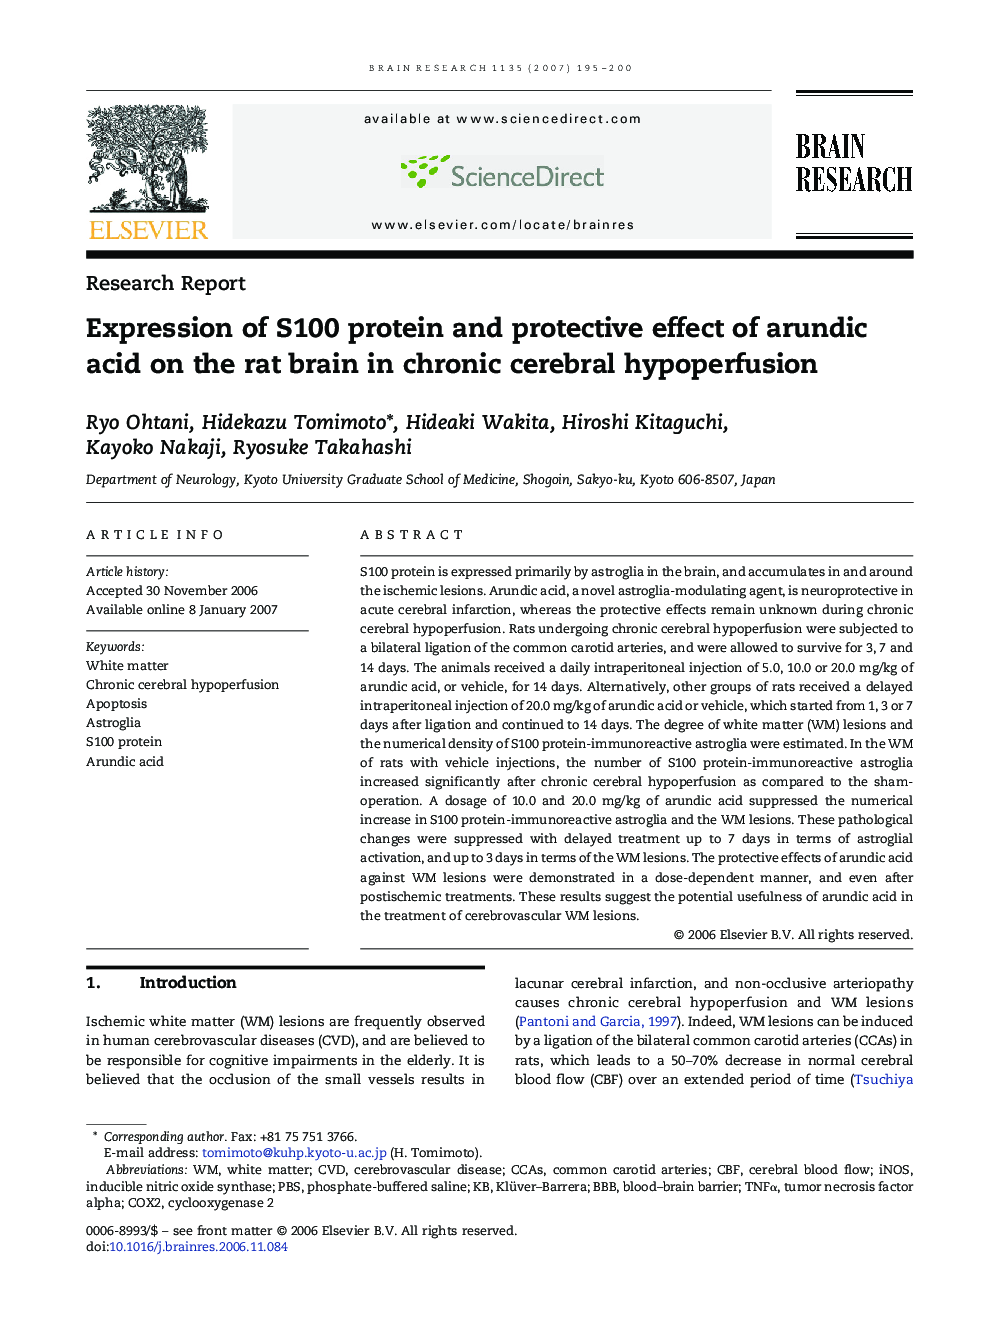 Research ReportExpression of S100 protein and protective effect of arundic acid on the rat brain in chronic cerebral hypoperfusion